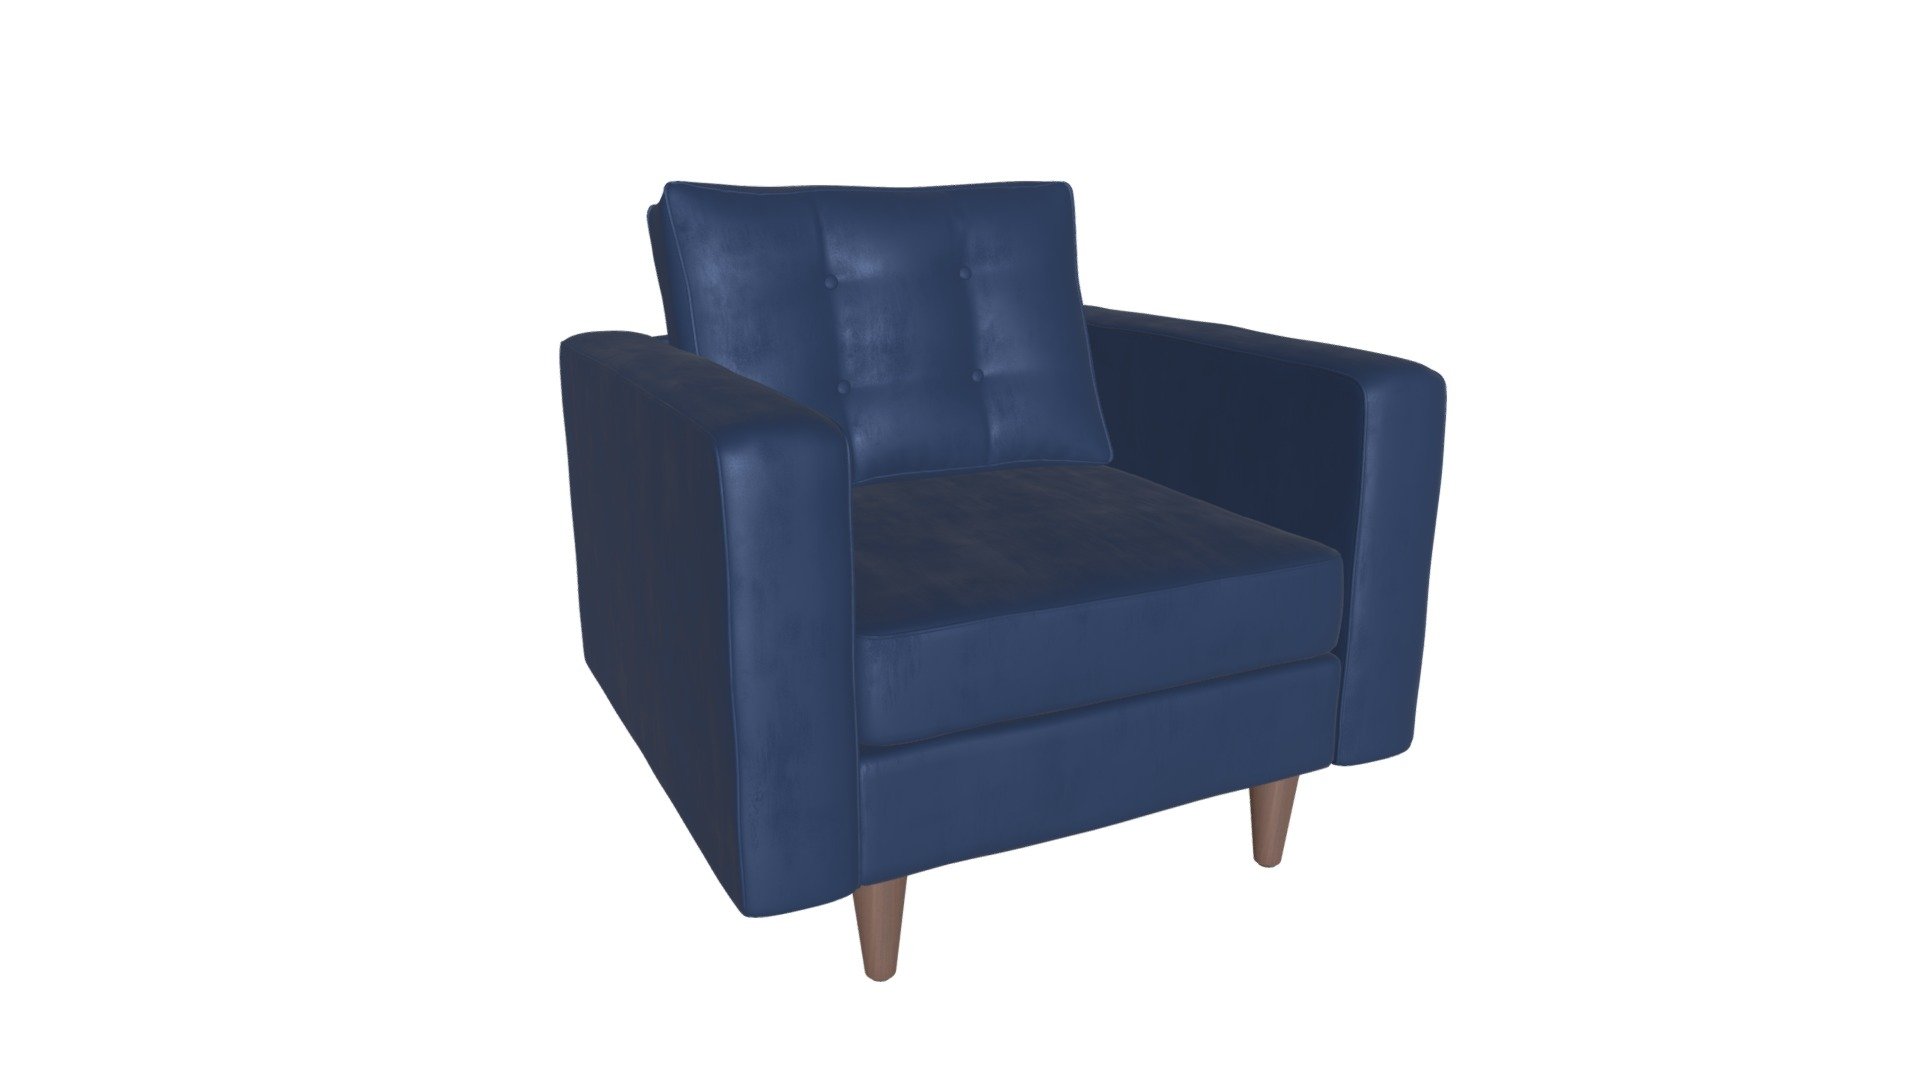 https://zuomod.com/puget-arm-chair-dark-blue-velvet

Mid-century modern simplicity. This luxurious armchair features a slim square profile and plush seat and back design. Accented button tufted back in matching upholstery fabric is finished with piping details to outside edges 3d model